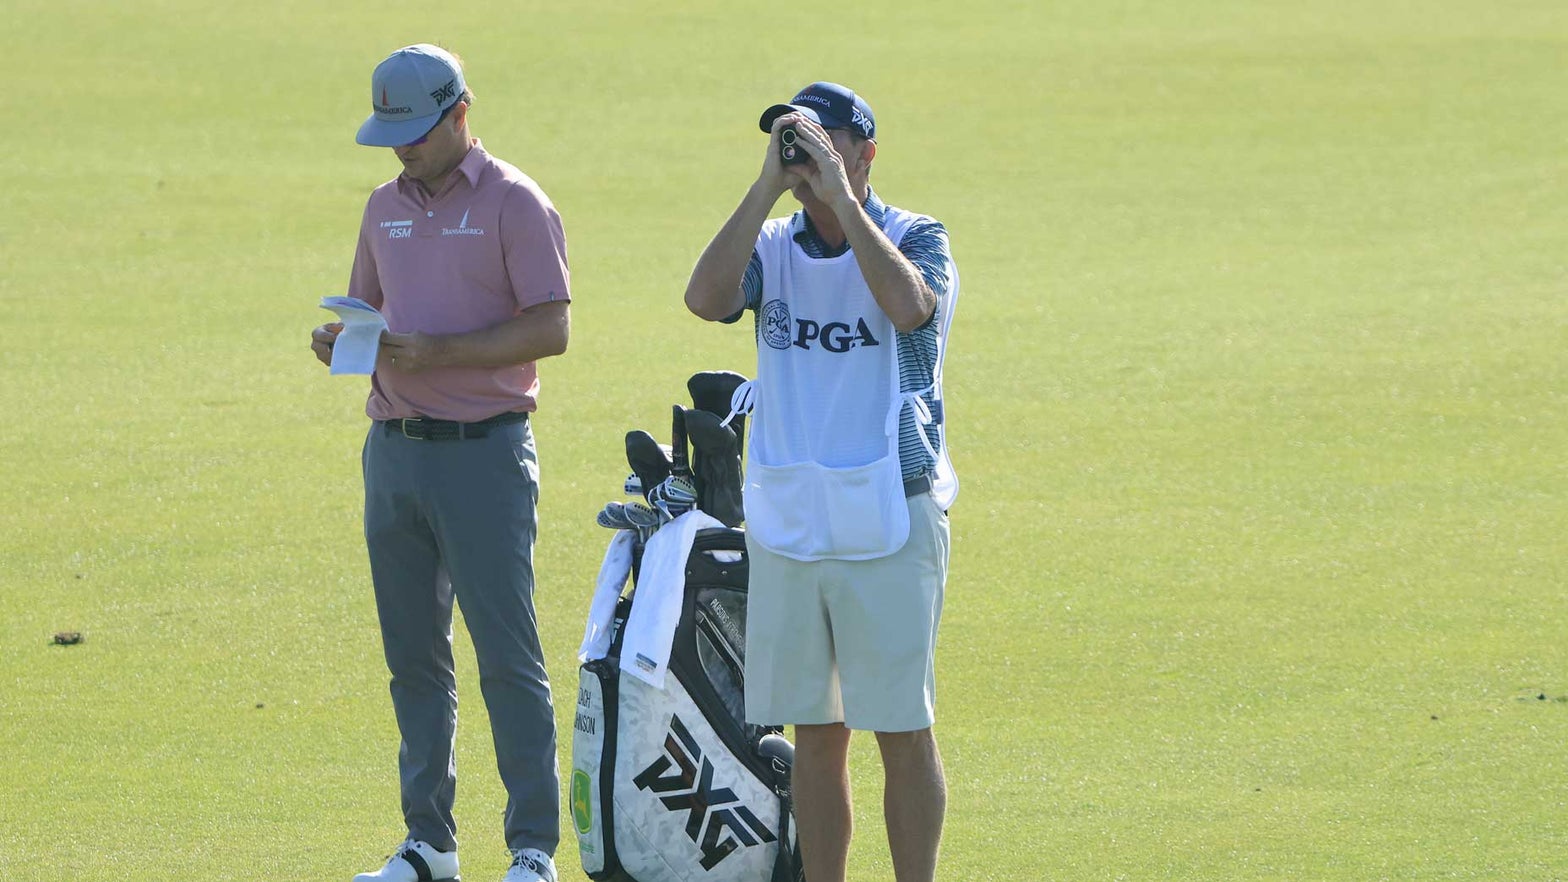 Get the same rangefinder the pros are loving at the PGA Championship